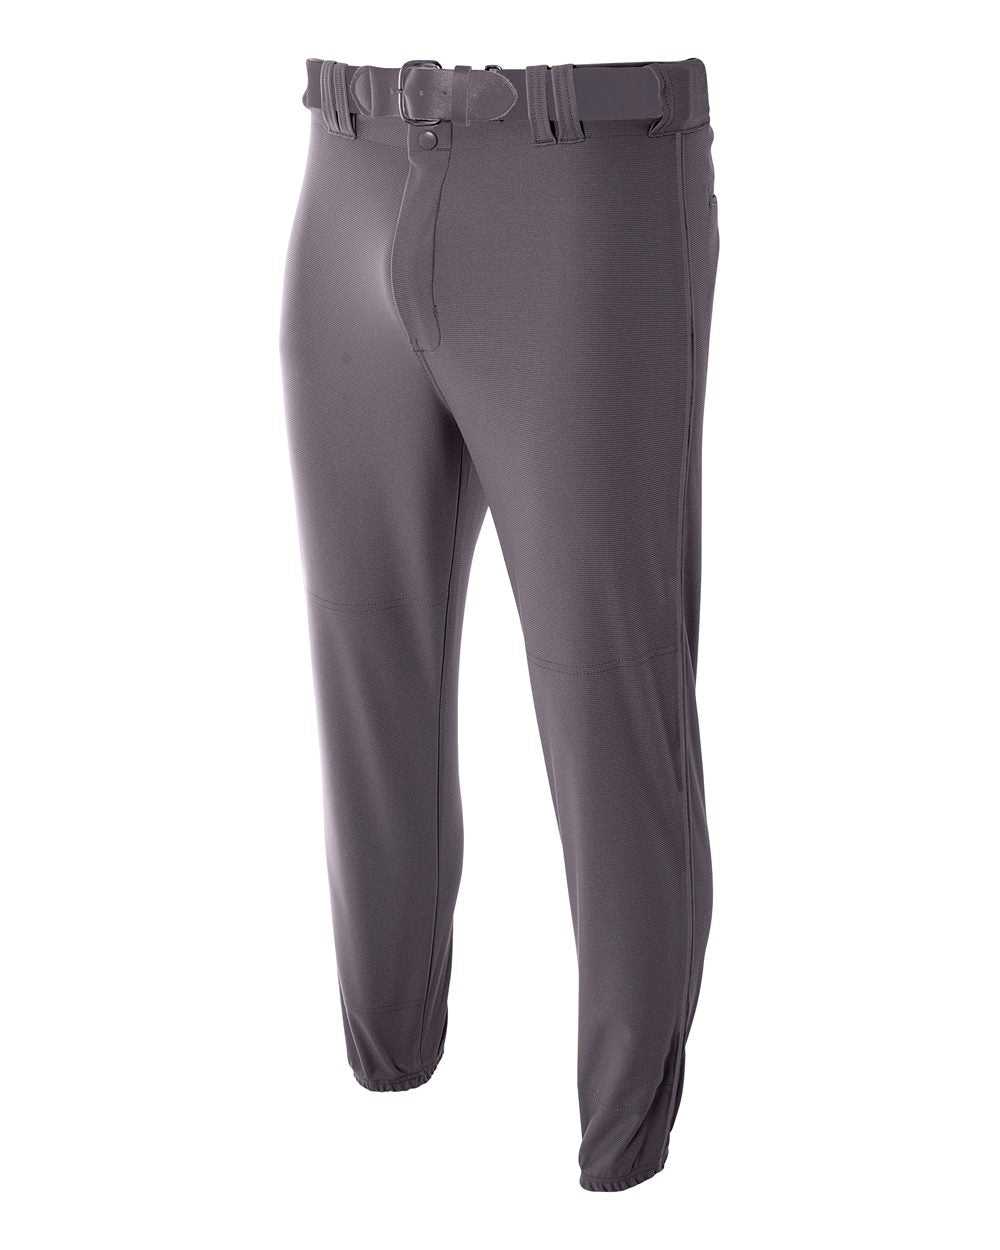 A4 NB6178 Youth Pro Style Elastic Bottom Baseball Pant - Graphite - HIT a Double